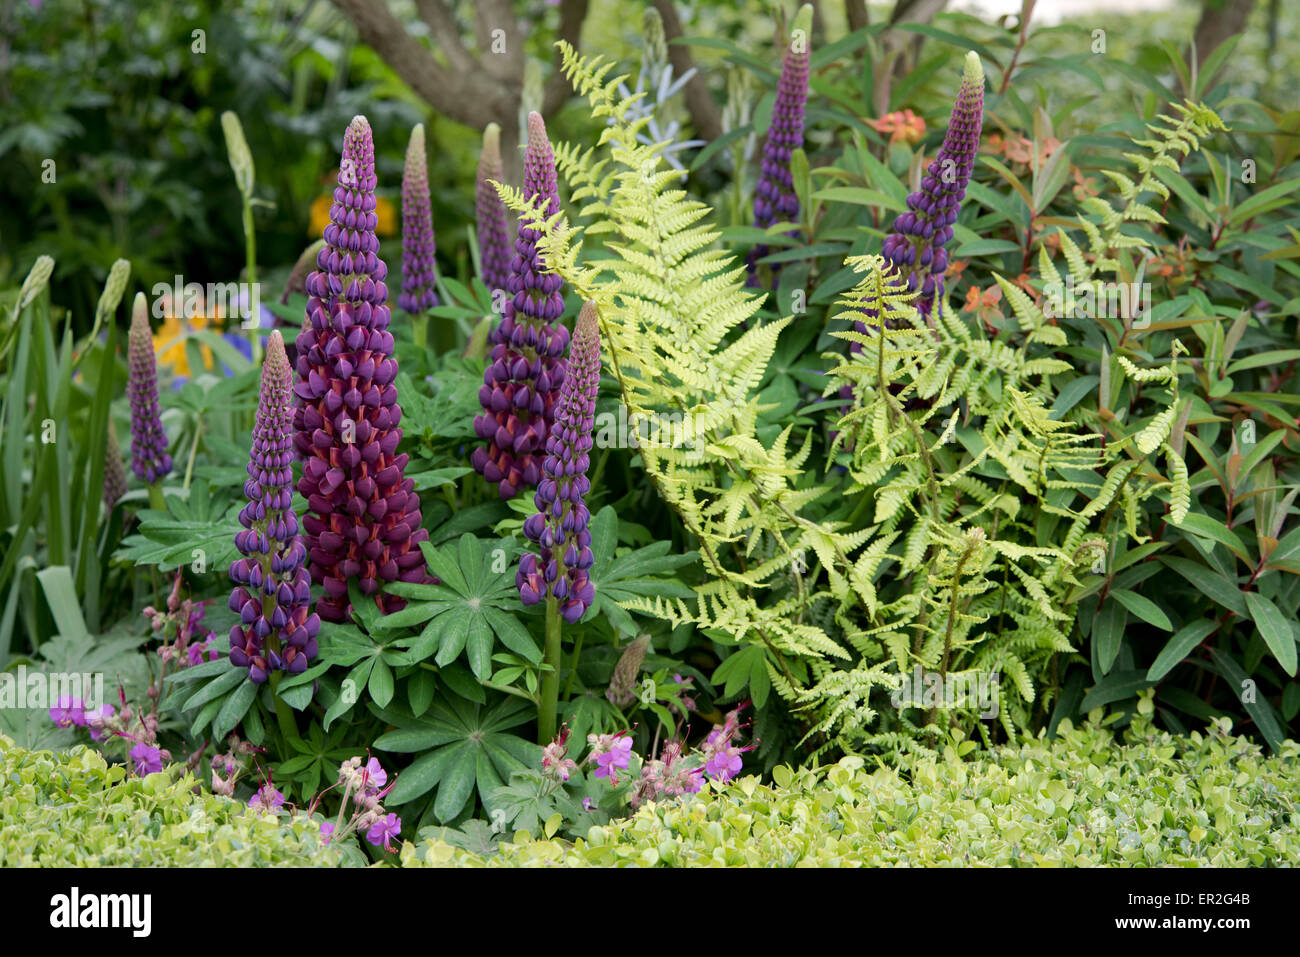 A close-up of purple lupins and ferns in The Health Cities Garden at The Chelsea Flower Show, 2015 Stock Photo